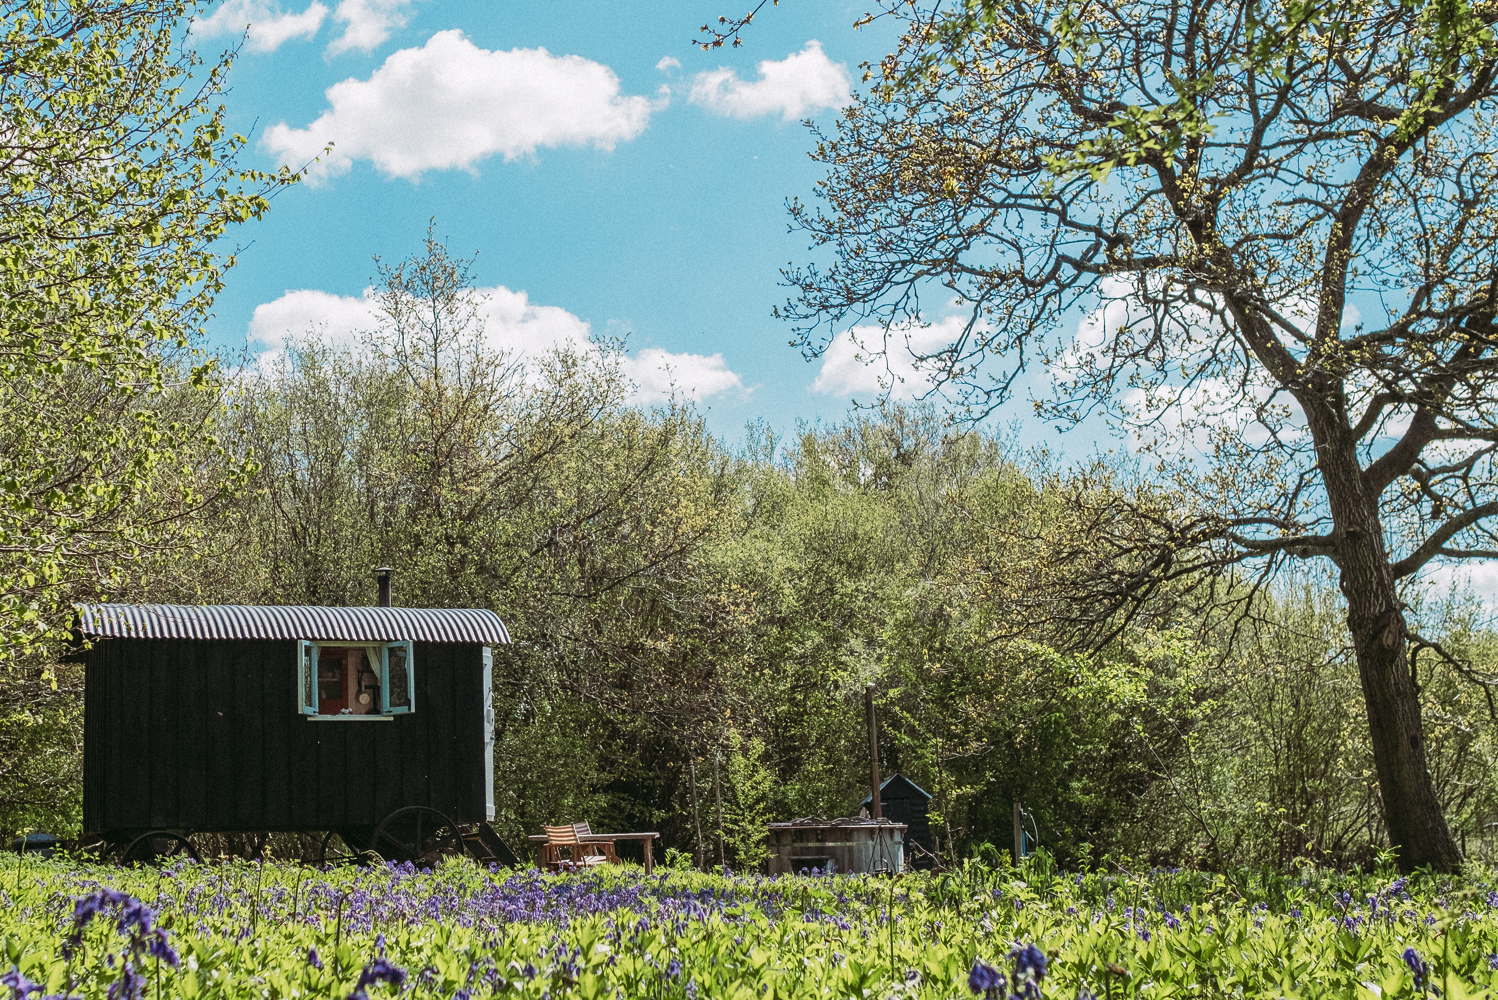 View across the paddock with flowering bluebells towards Old Winchester Shepherd's Hut, outdoor furniture and woodfired hot tub